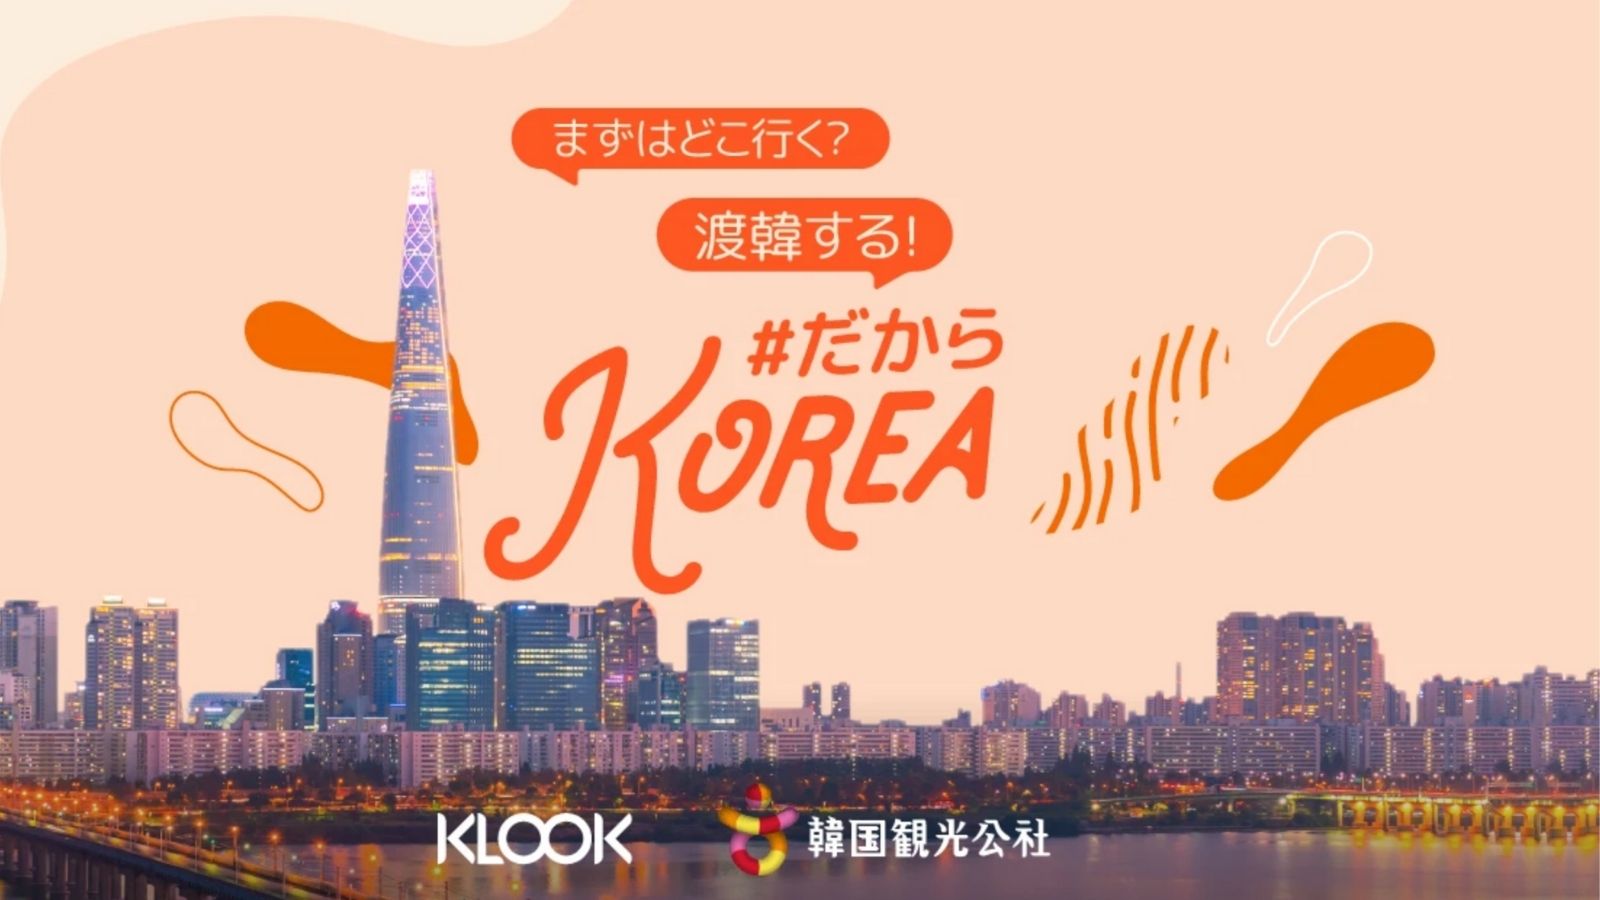 [Local activity 100% OFF coupon available! ] Klook launches coupon campaign in collaboration with Korea Tourism Organization thumbnail